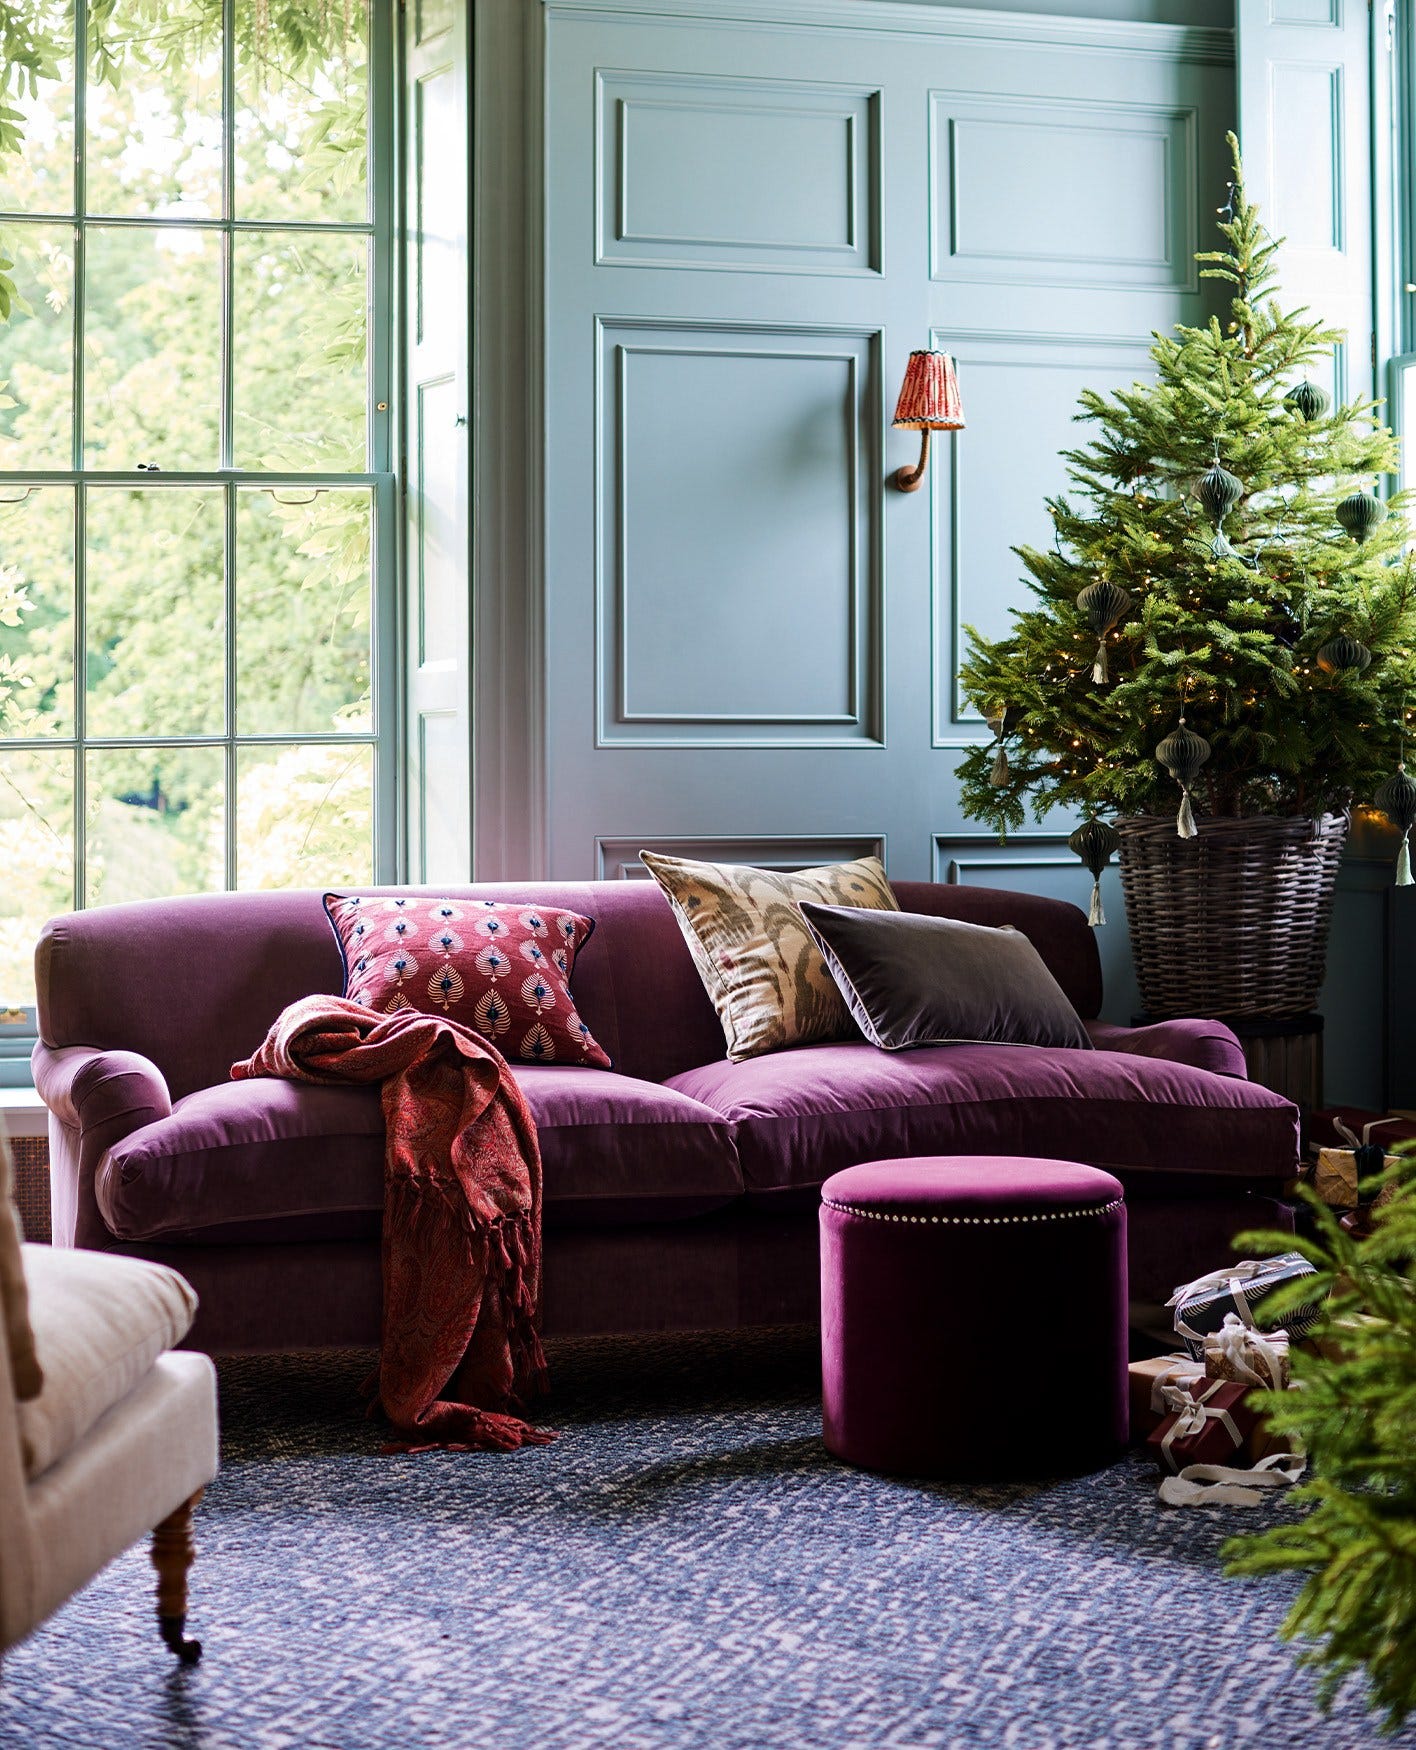 A bright magenta velvet sofa sits in a blue-walled room. A Christmas tree is seen in the background, and the sofa is decorated with pillows.